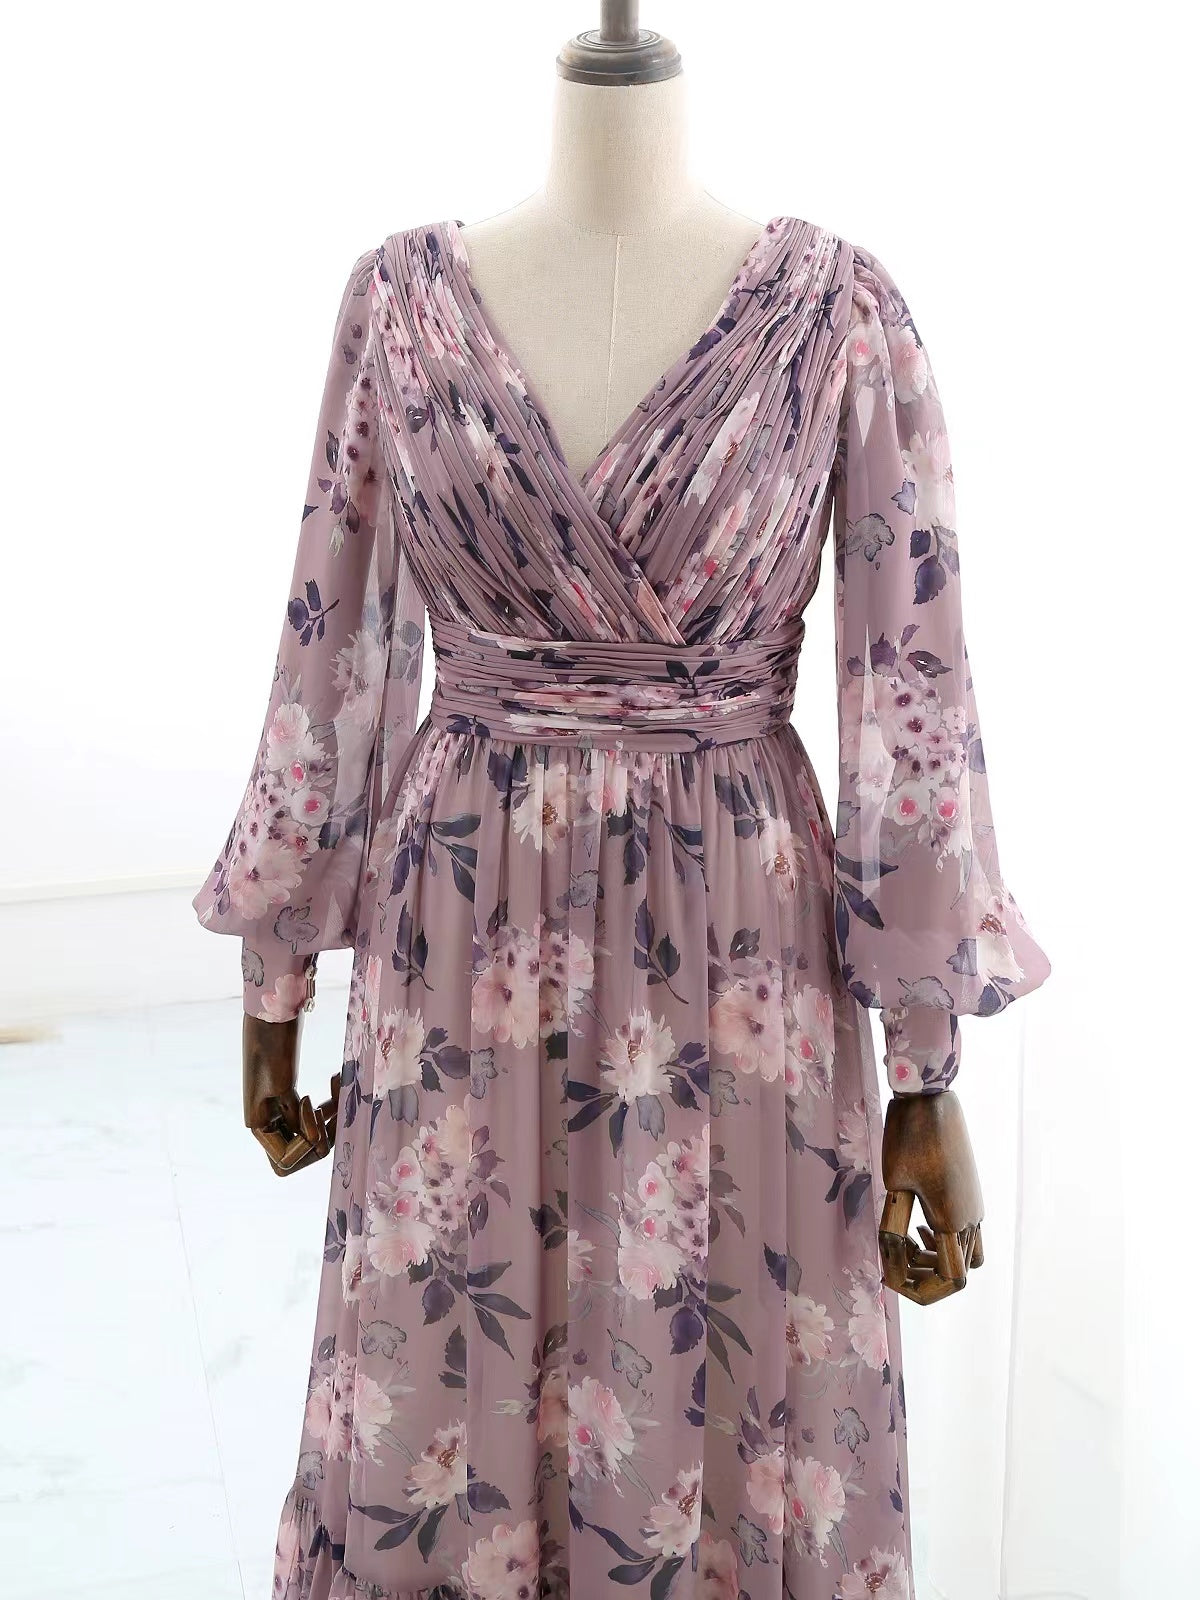 Long Puff Sleeves V Neck Floral Chiffon Wisteria Evening Gown Wedding Guest Dress